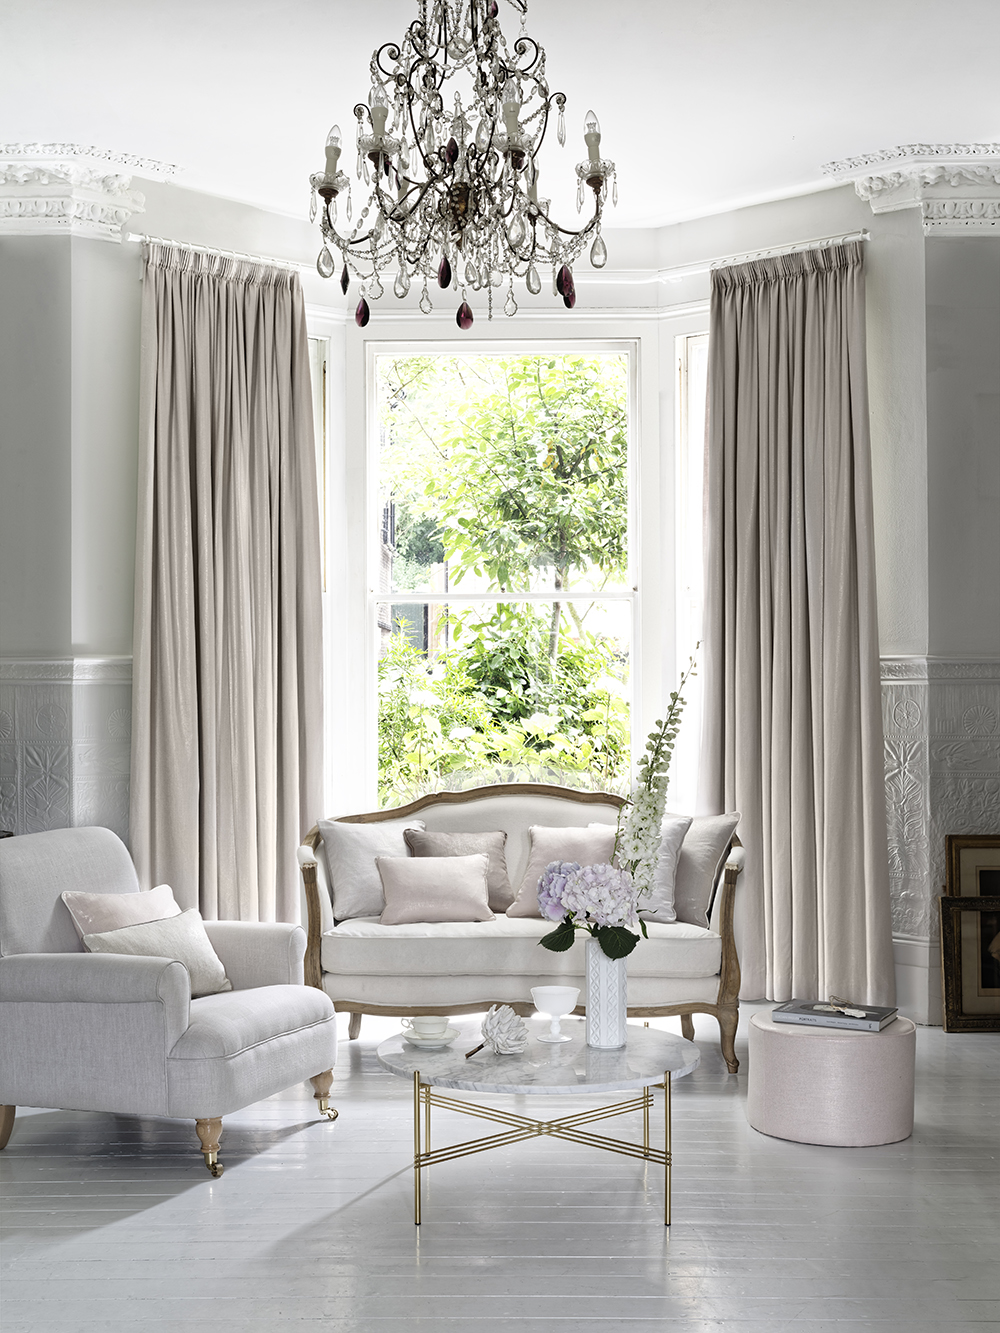 Opulent white living room with curtains and chandelier